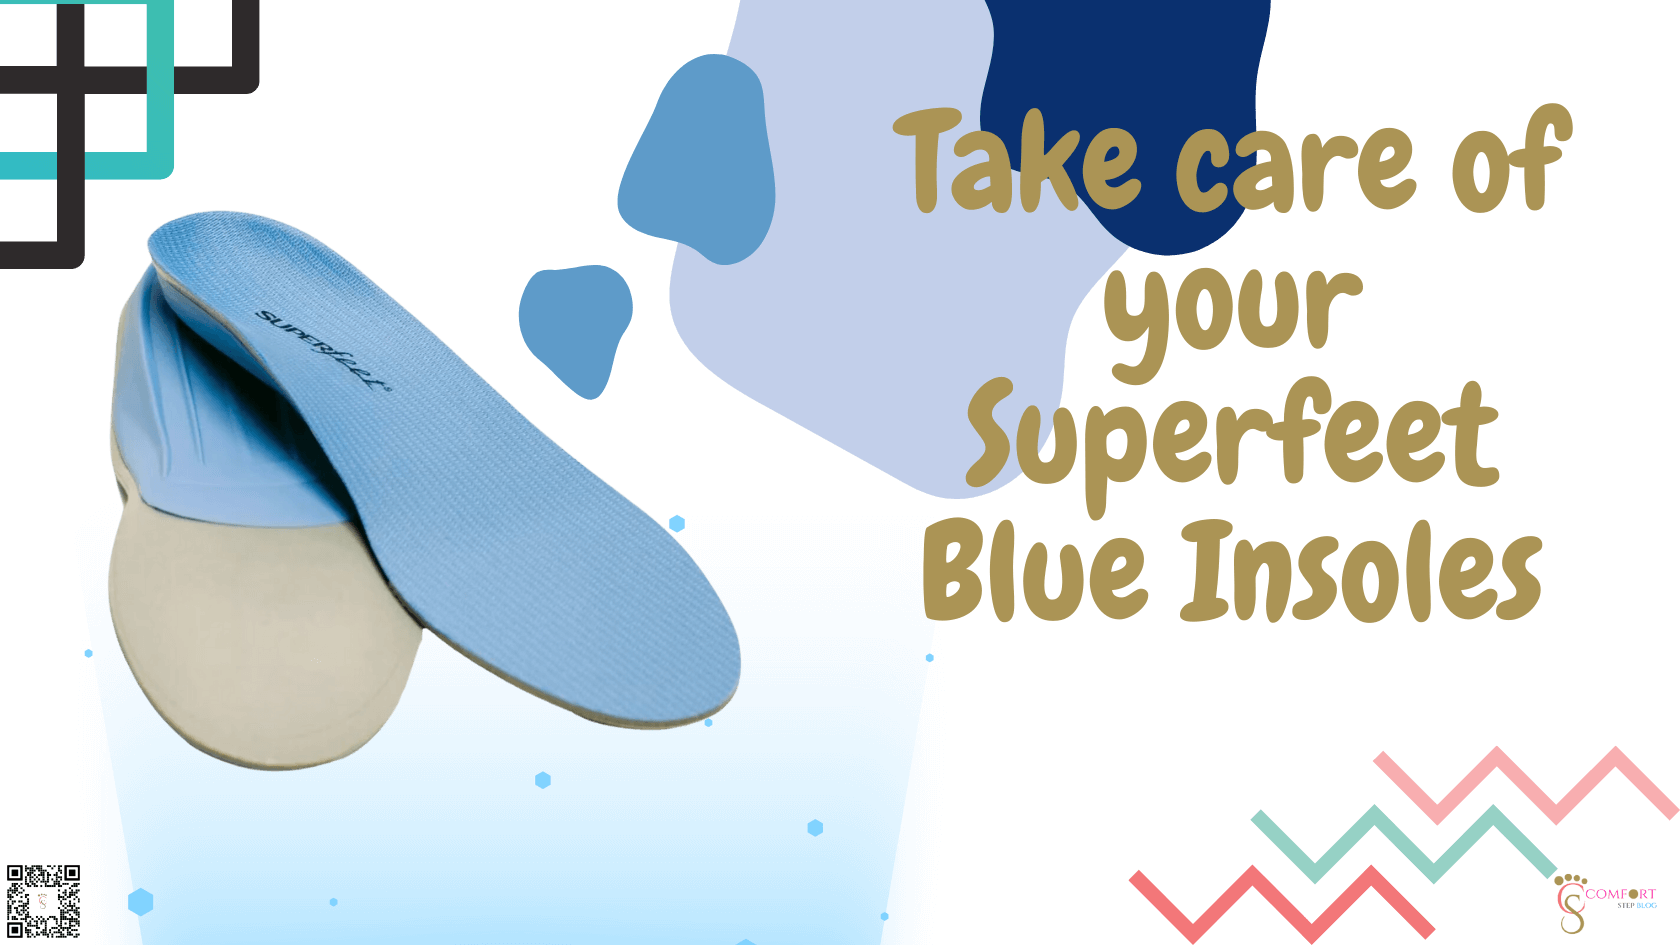 Take care of your Superfeet Blue Insoles